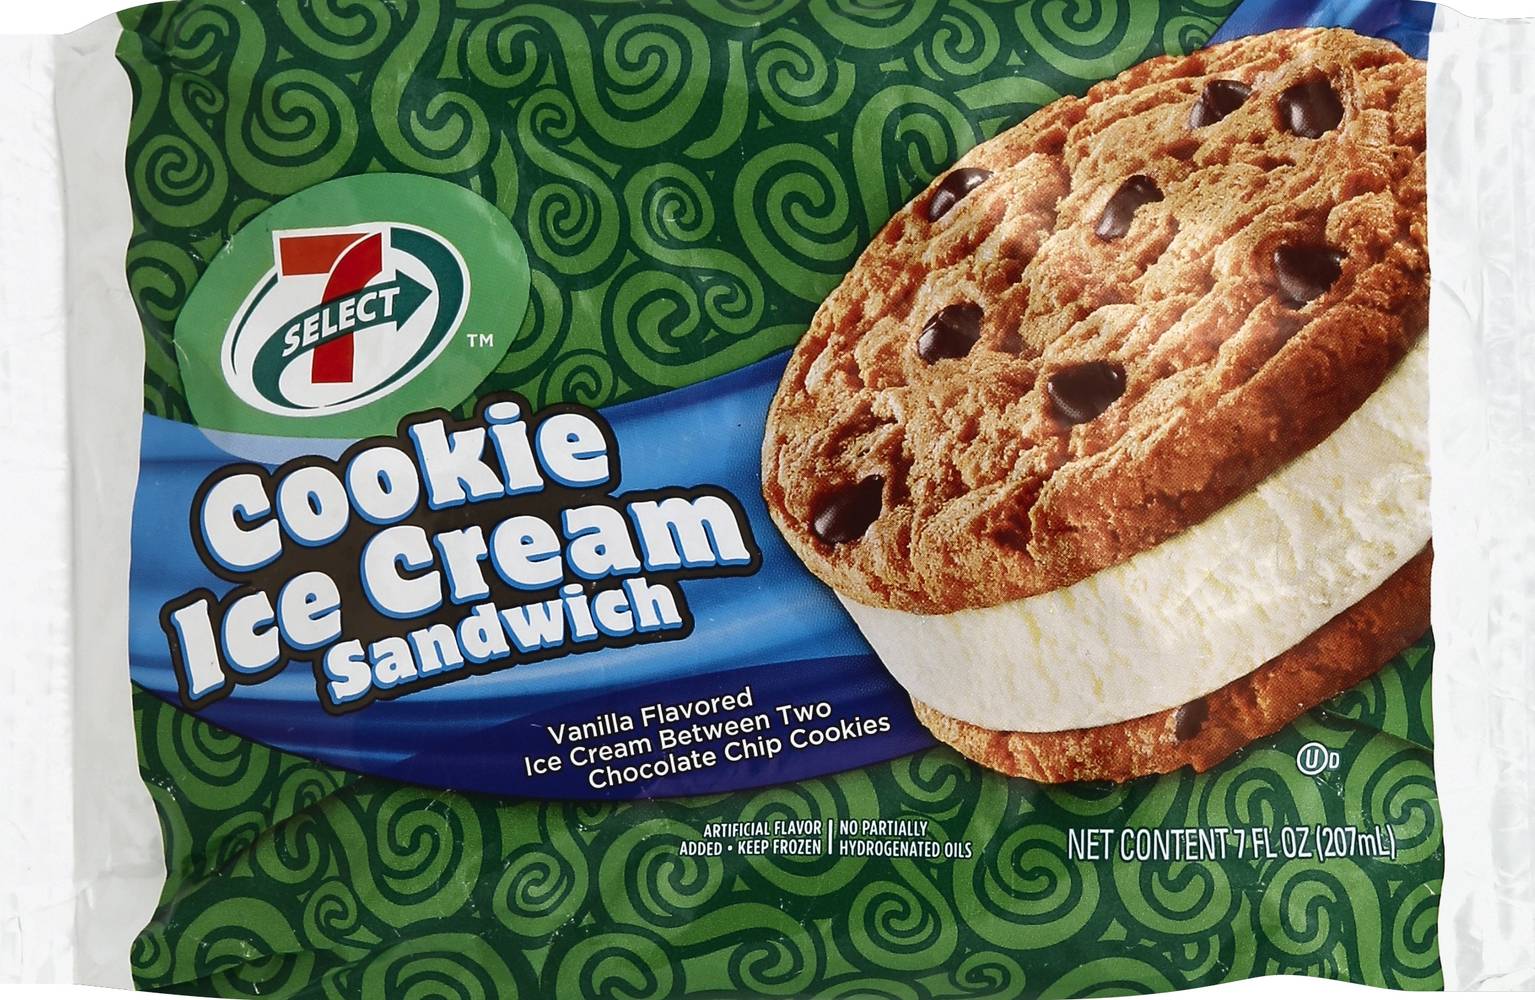 7-Select Ice Cream Sandwich Between Two Chocolate Chip Soft Cookies (vanilla)